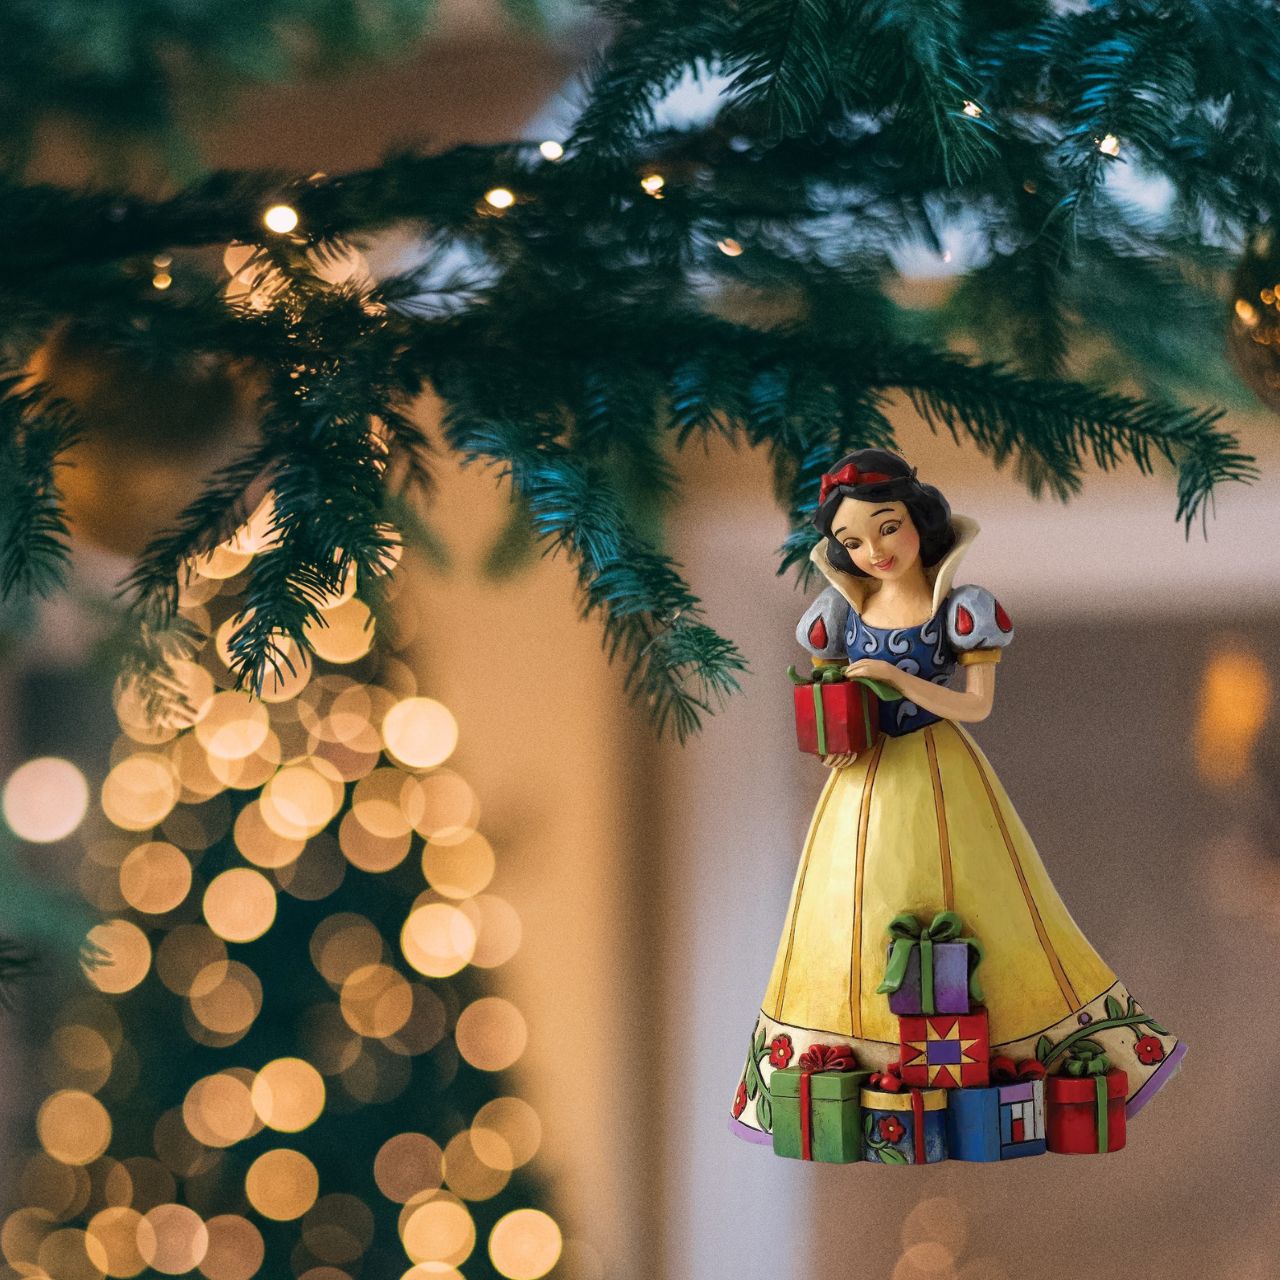 Jim Shore Disney Snow White Hanging Ornament  Disney Traditions combines the magic of Disney with the festive artistry of Jim Shore. This Snow White cast stone hanging ornament is sure to add Disney's magic to your Christmas tree.